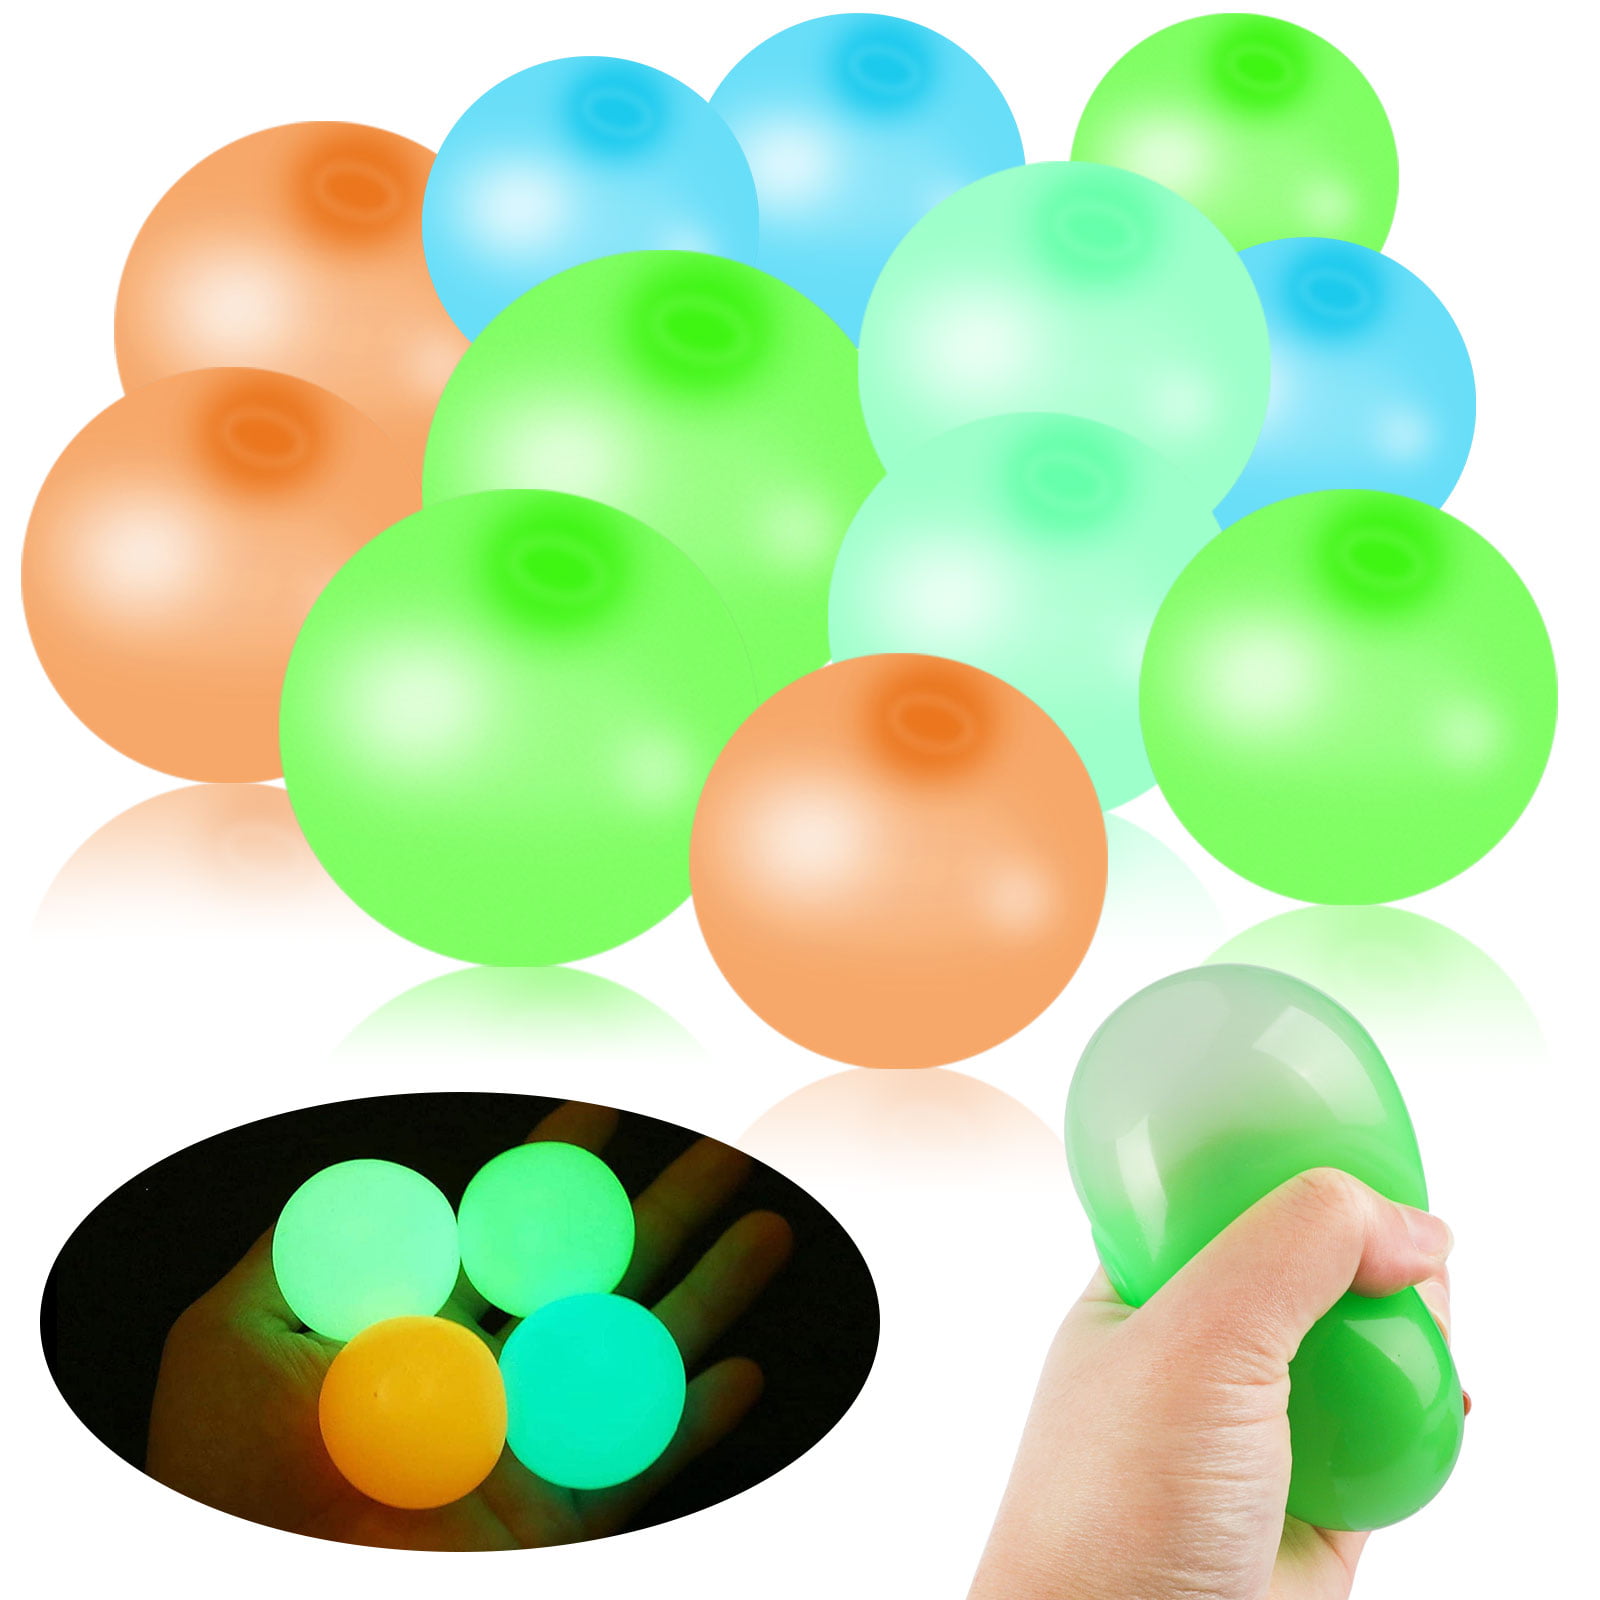 4X Fluorescent Sticky Wall Balls For Stress Relief Reliefer Globbles Squishy Toy 